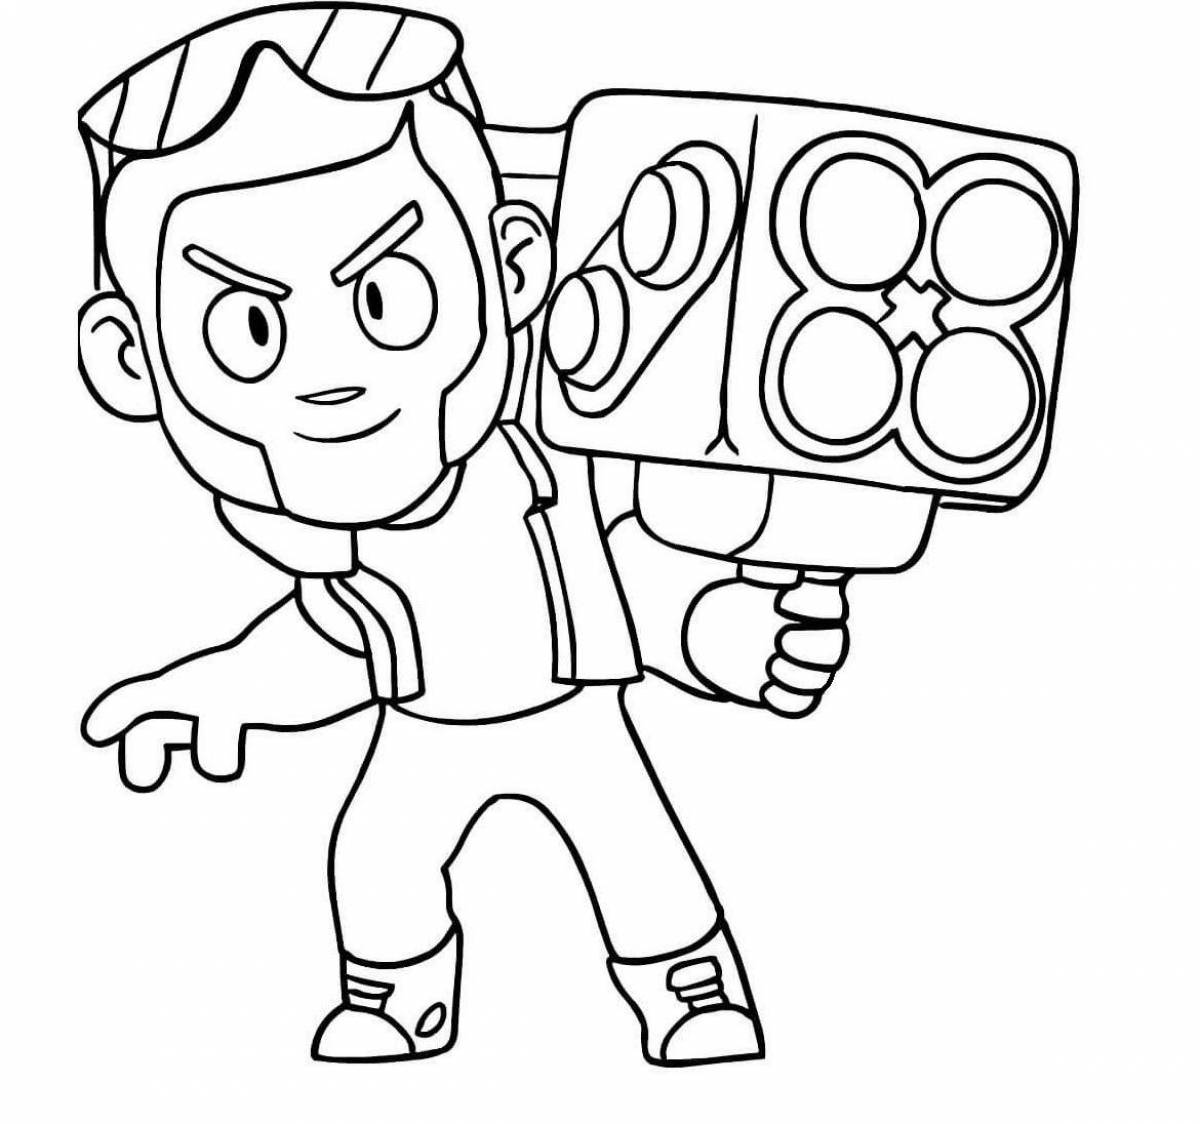 Color-explosive coloring page for boys app